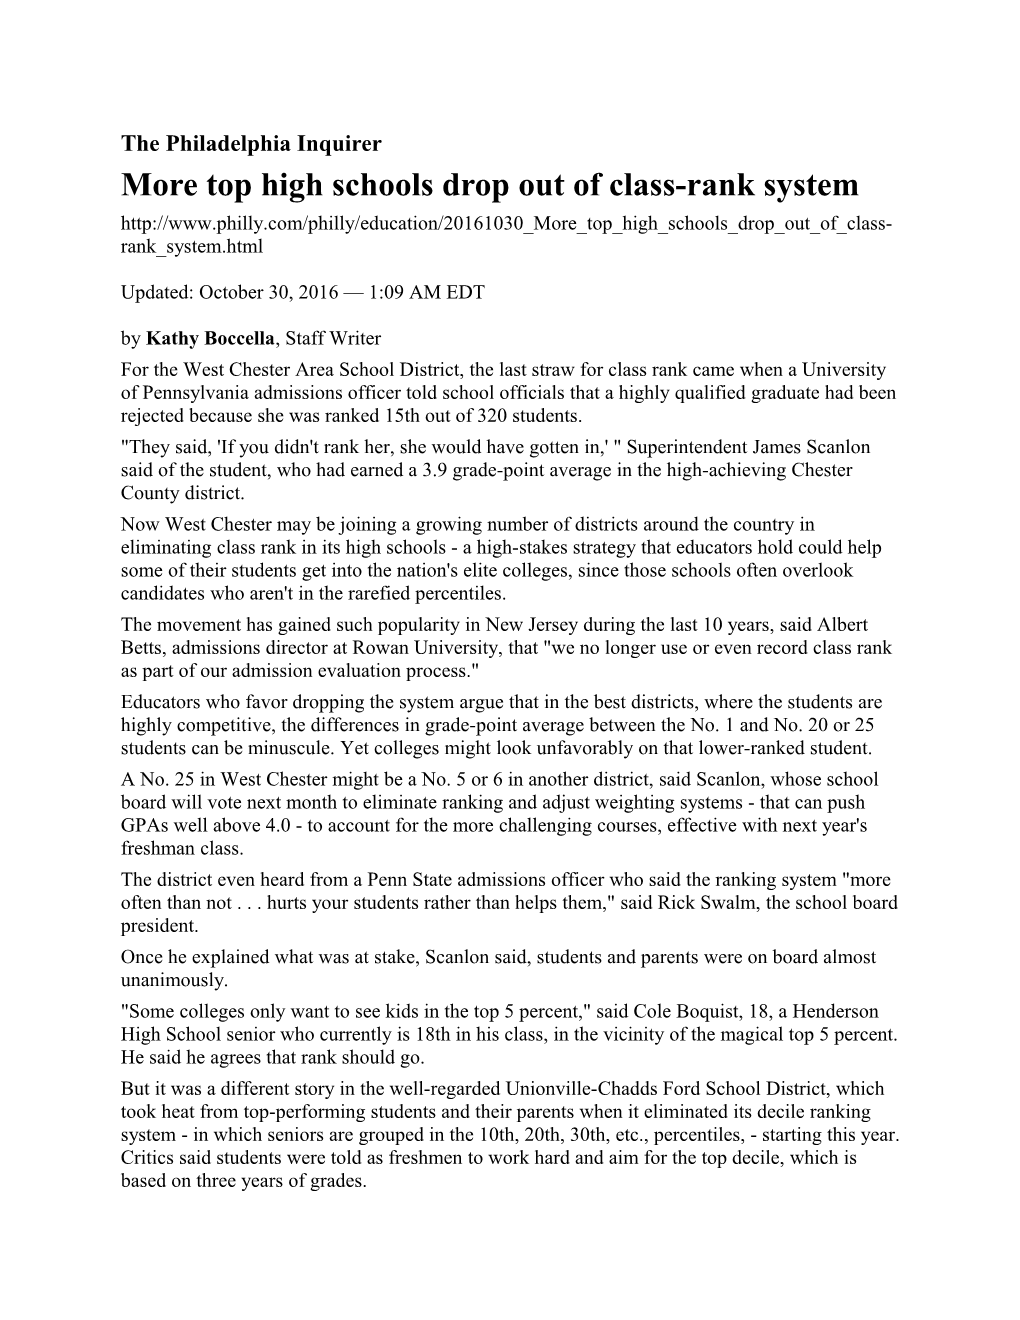 More Top High Schools Drop out of Class-Rank System